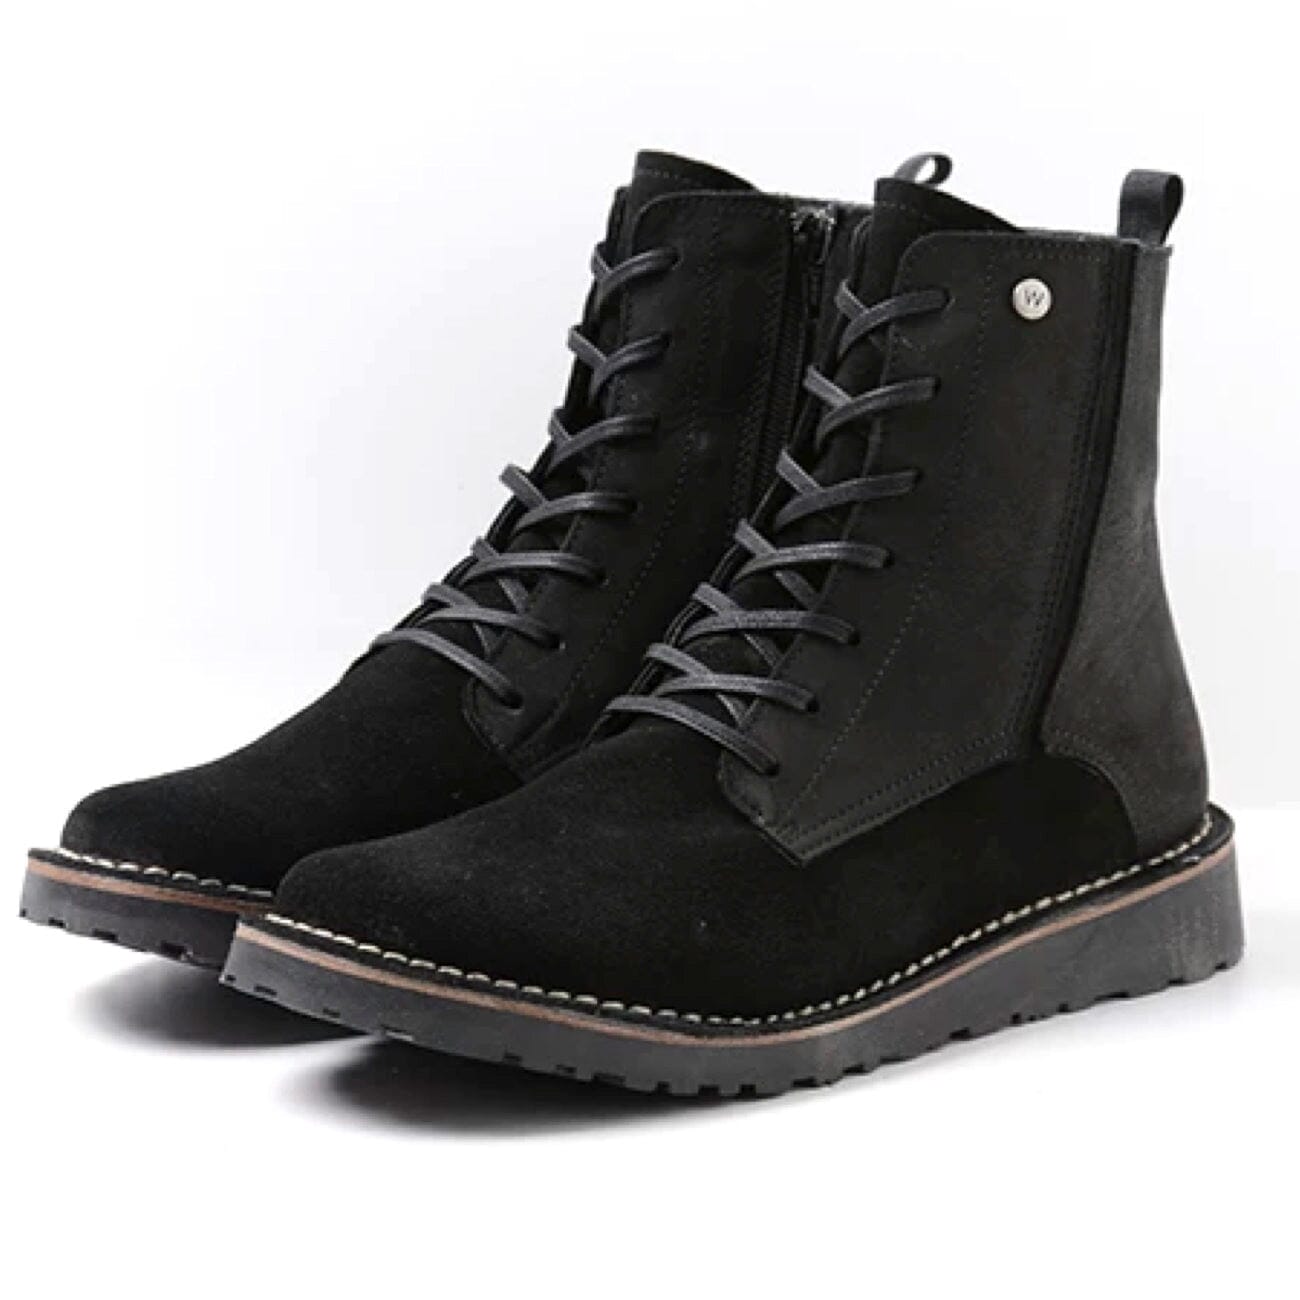 Wolky, Wagga Wagga, Boots, Suede Leather, Black Boots Wolky Black 37 